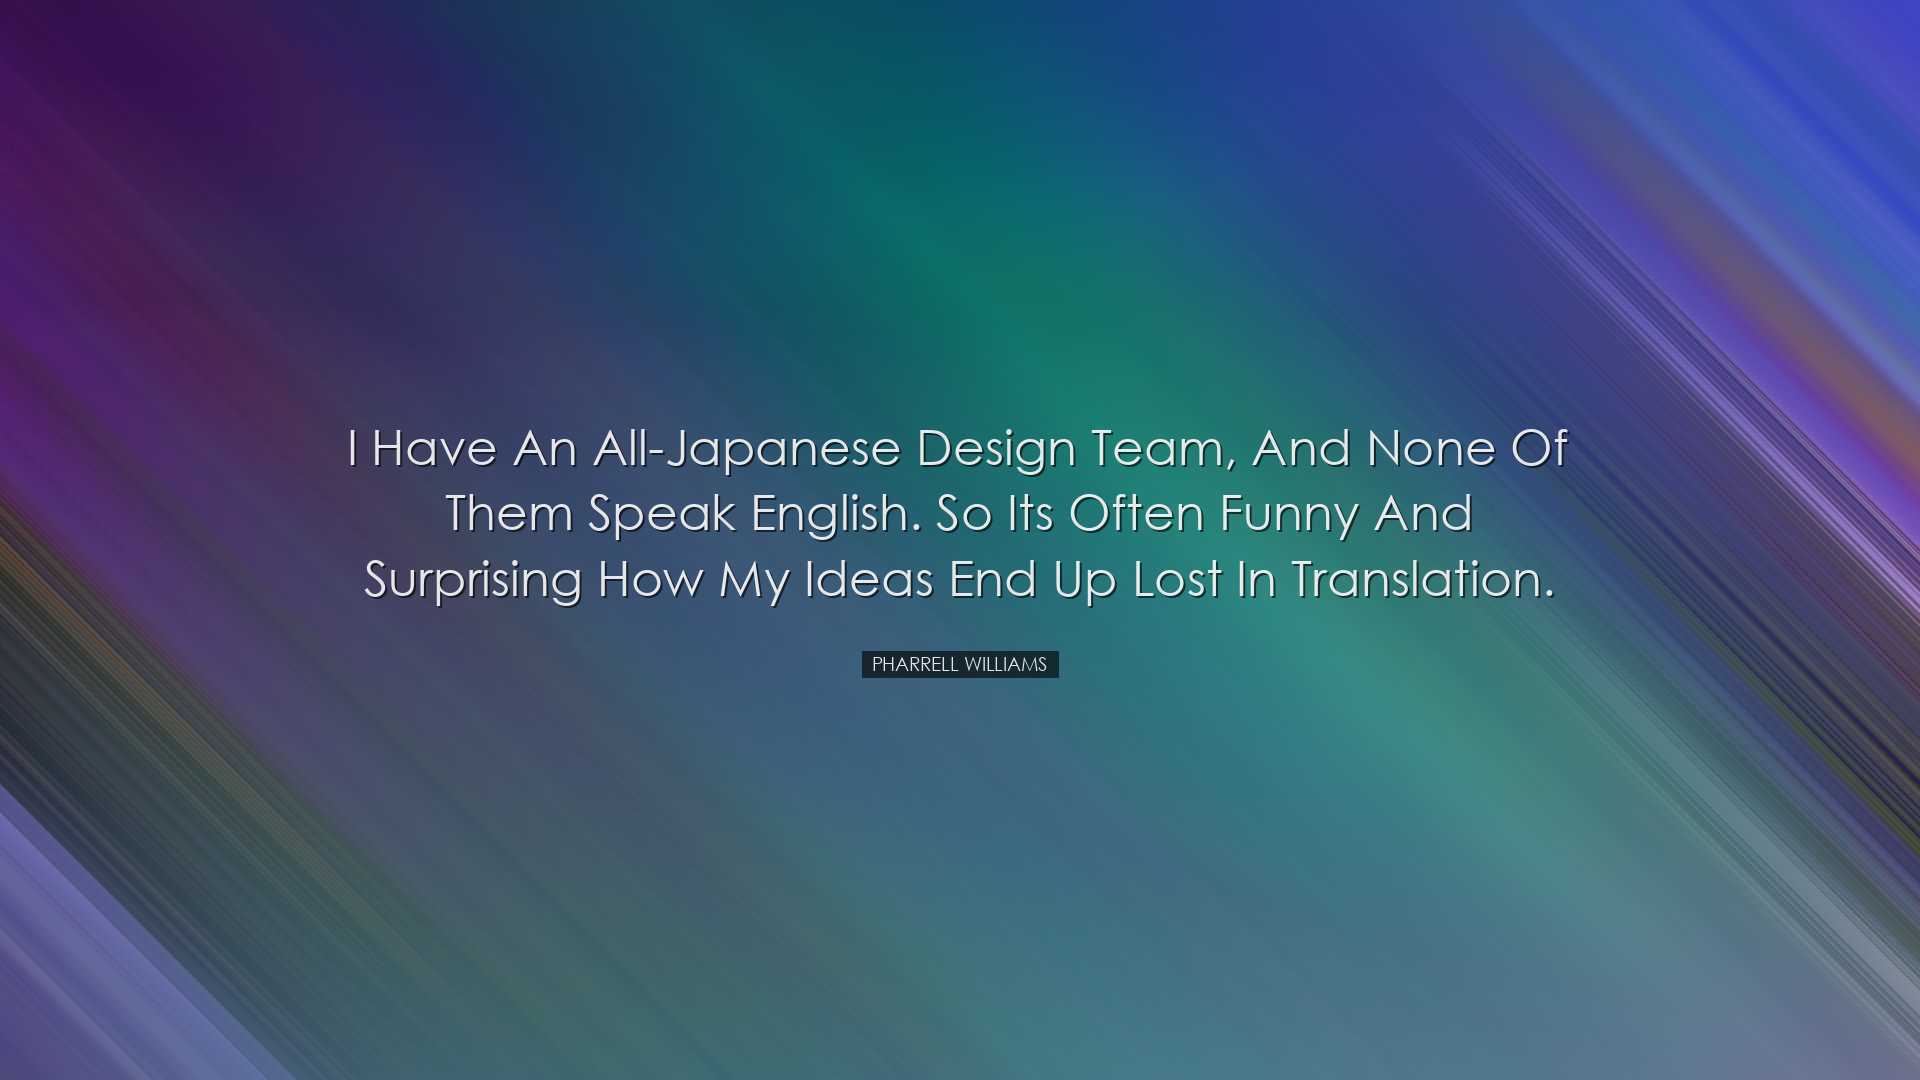 I have an all-Japanese design team, and none of them speak English